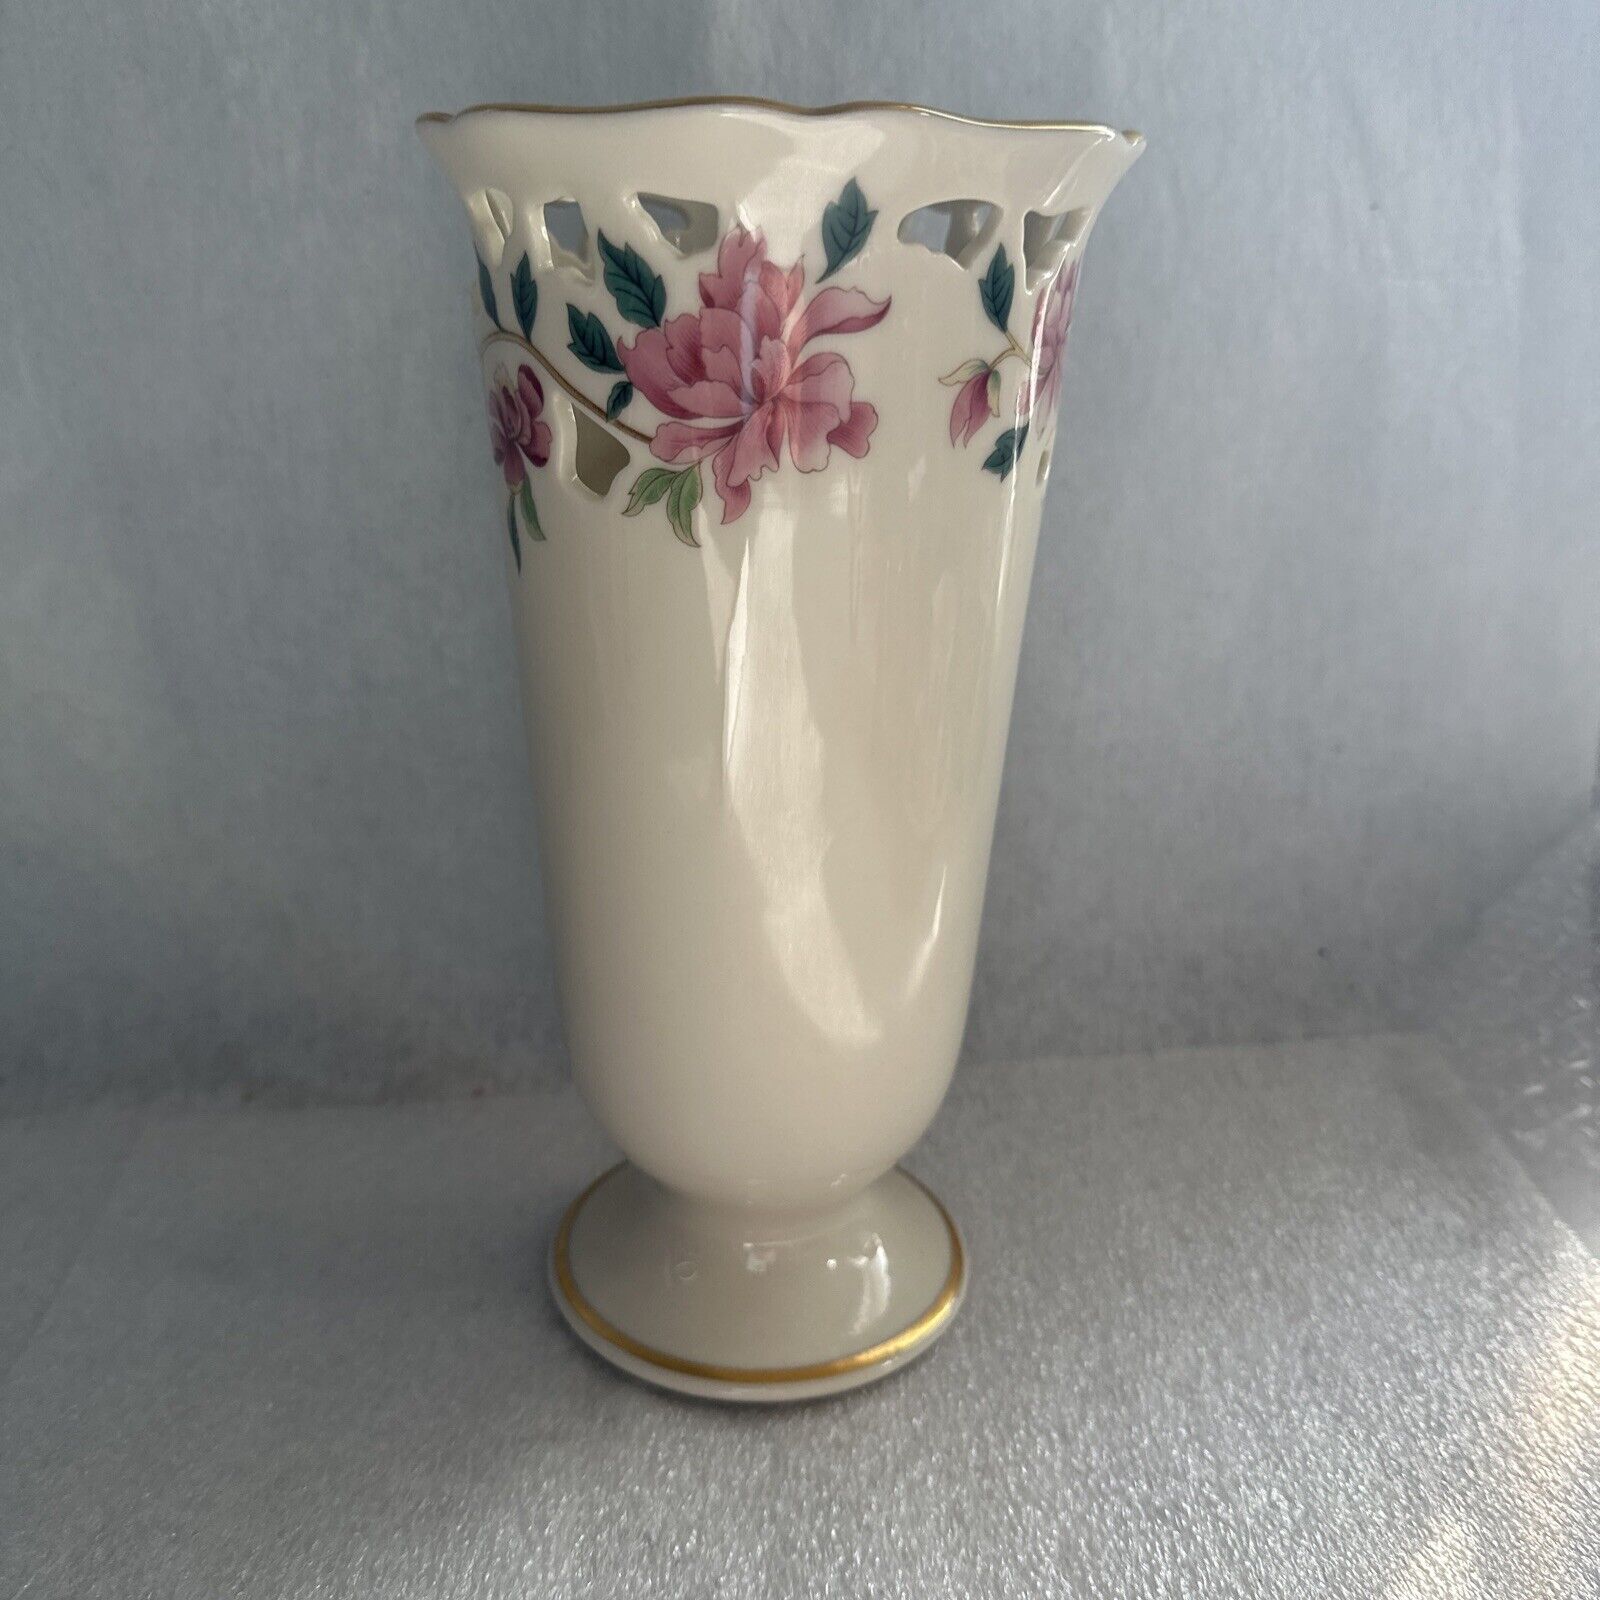 Vintage USA Lenox Barrington Collection Reticulated Pierced Floral Footed Vase